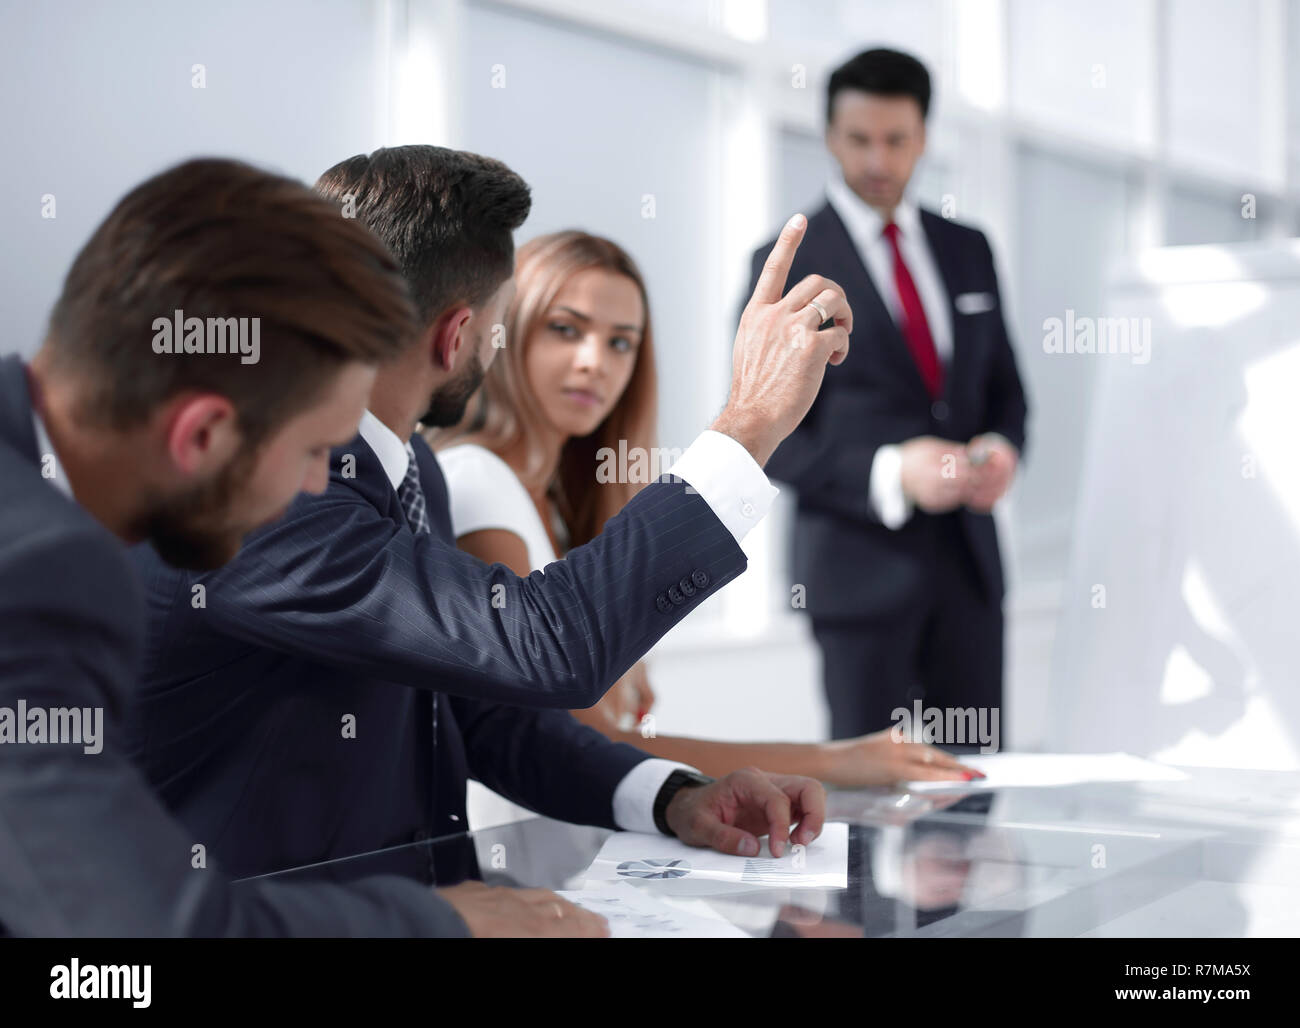 employee at the presentation raise their hands to ask a question Stock Photo